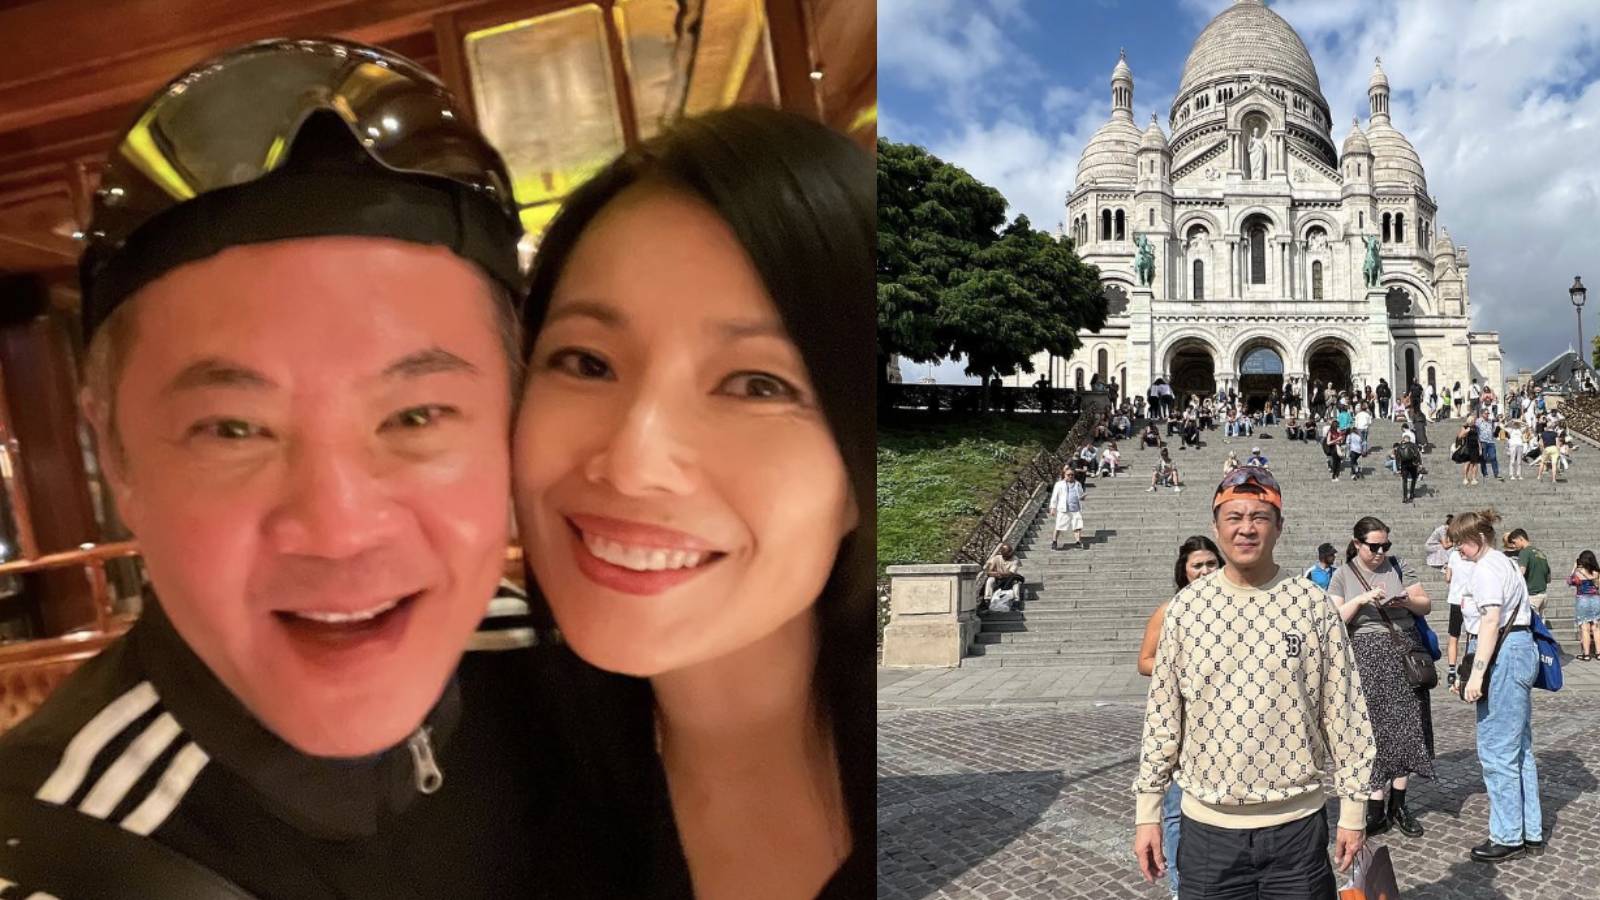 Sharon Au Met Up With Terence Cao In Paris; Says He’s "One Of The Most Hardworking And Generous” People She Knows